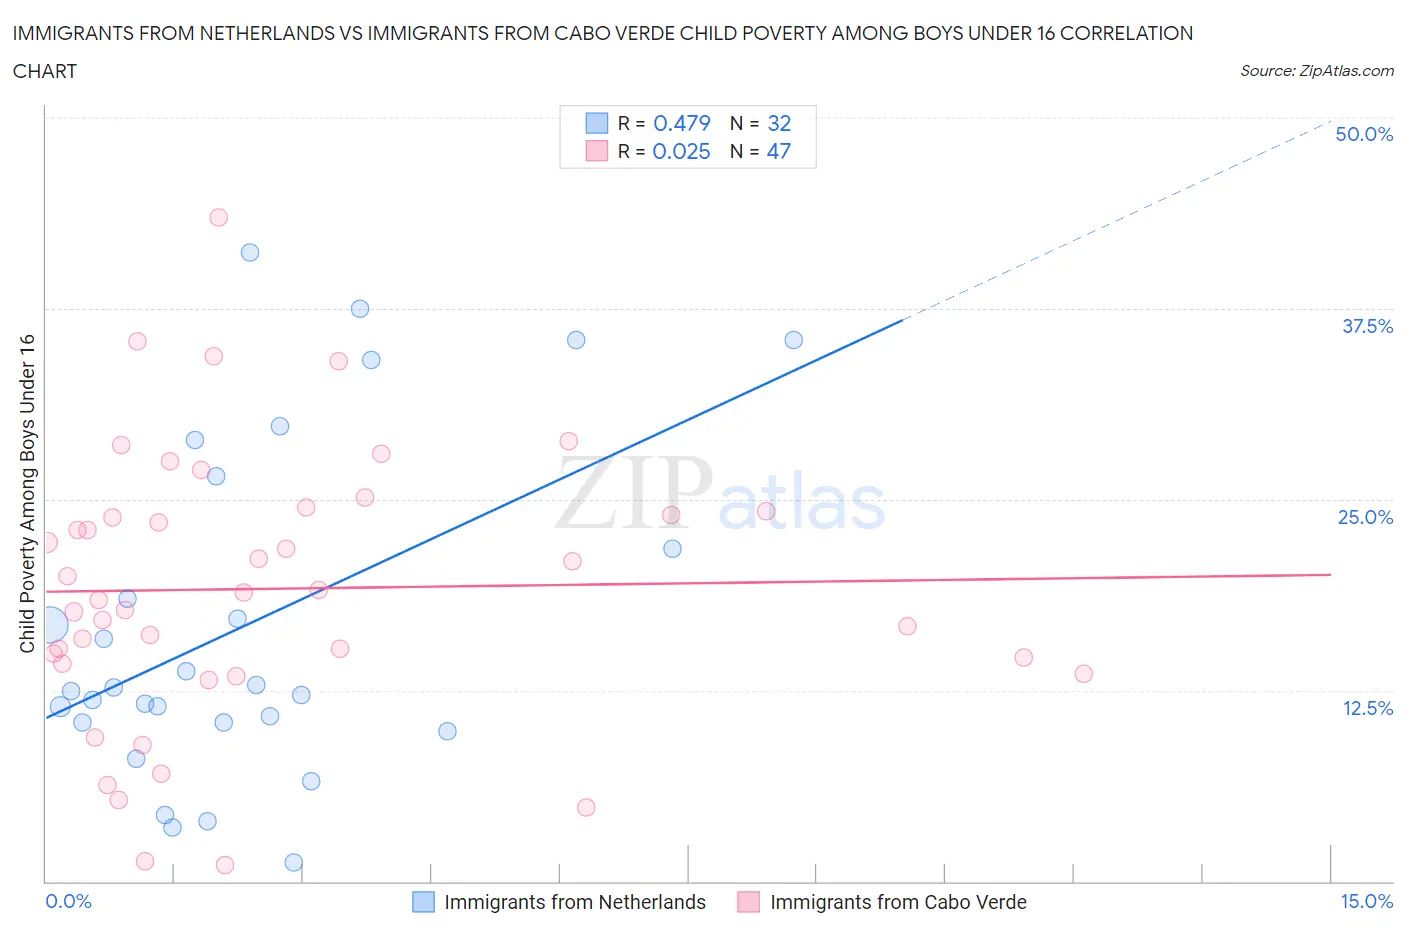 Immigrants from Netherlands vs Immigrants from Cabo Verde Child Poverty Among Boys Under 16